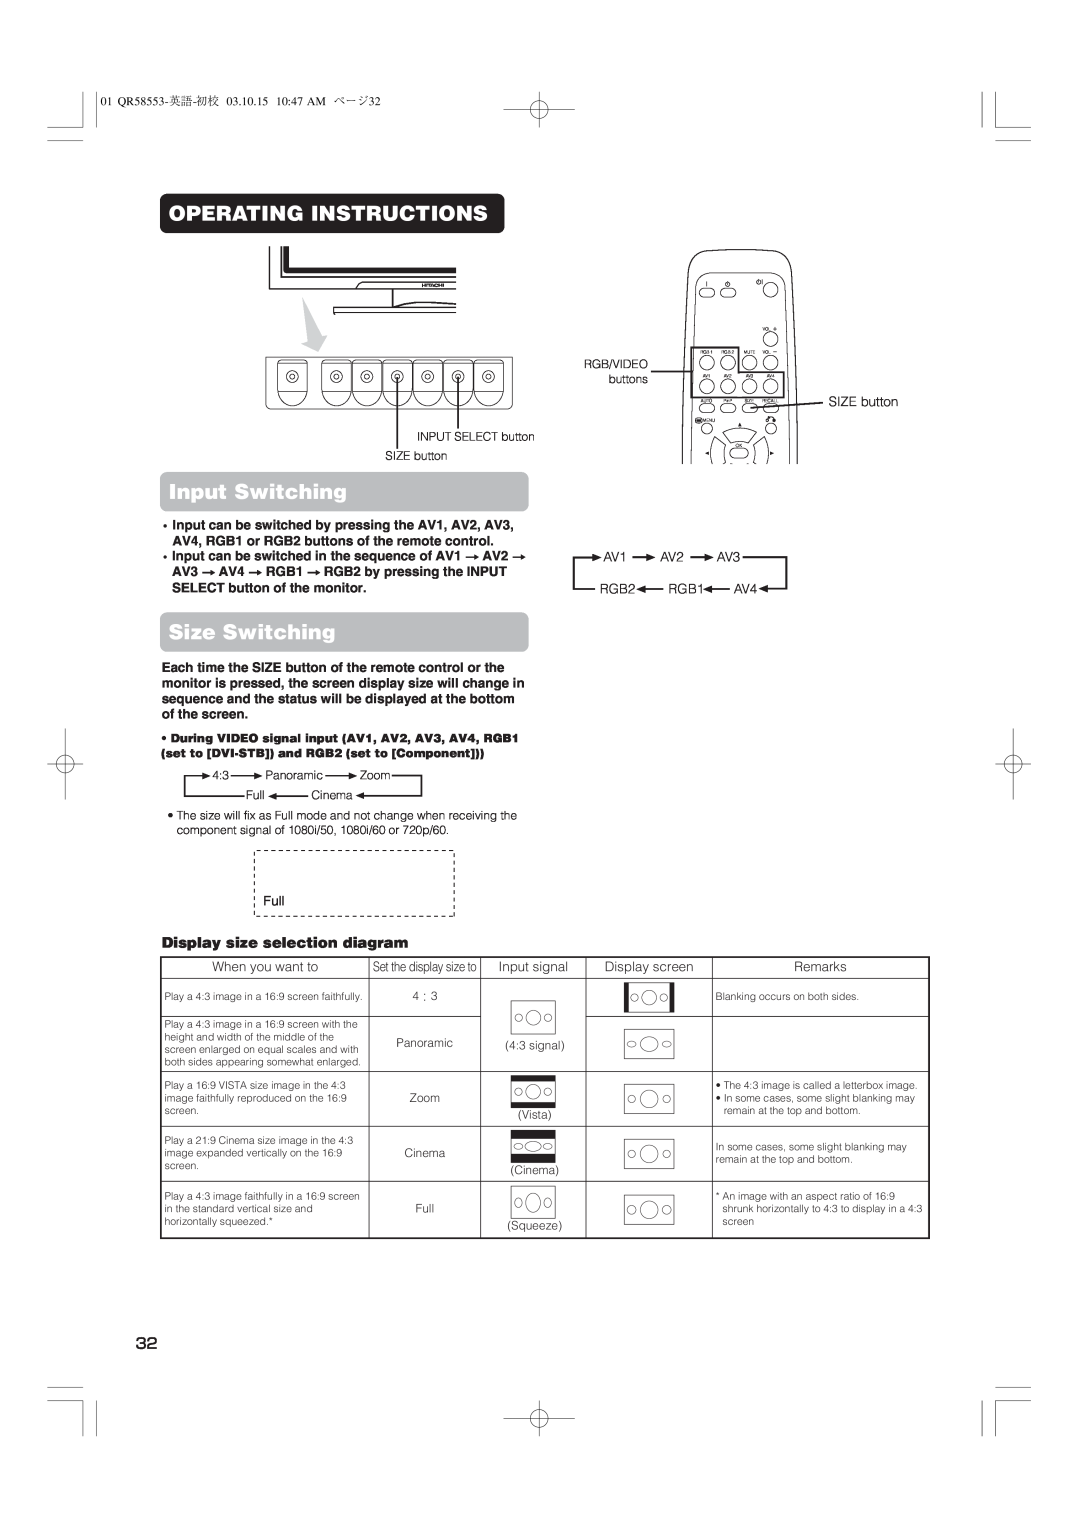 Hitachi 42PD5000 user manual Operating Instructions, Input Switching, Size Switching, Display size selection diagram 